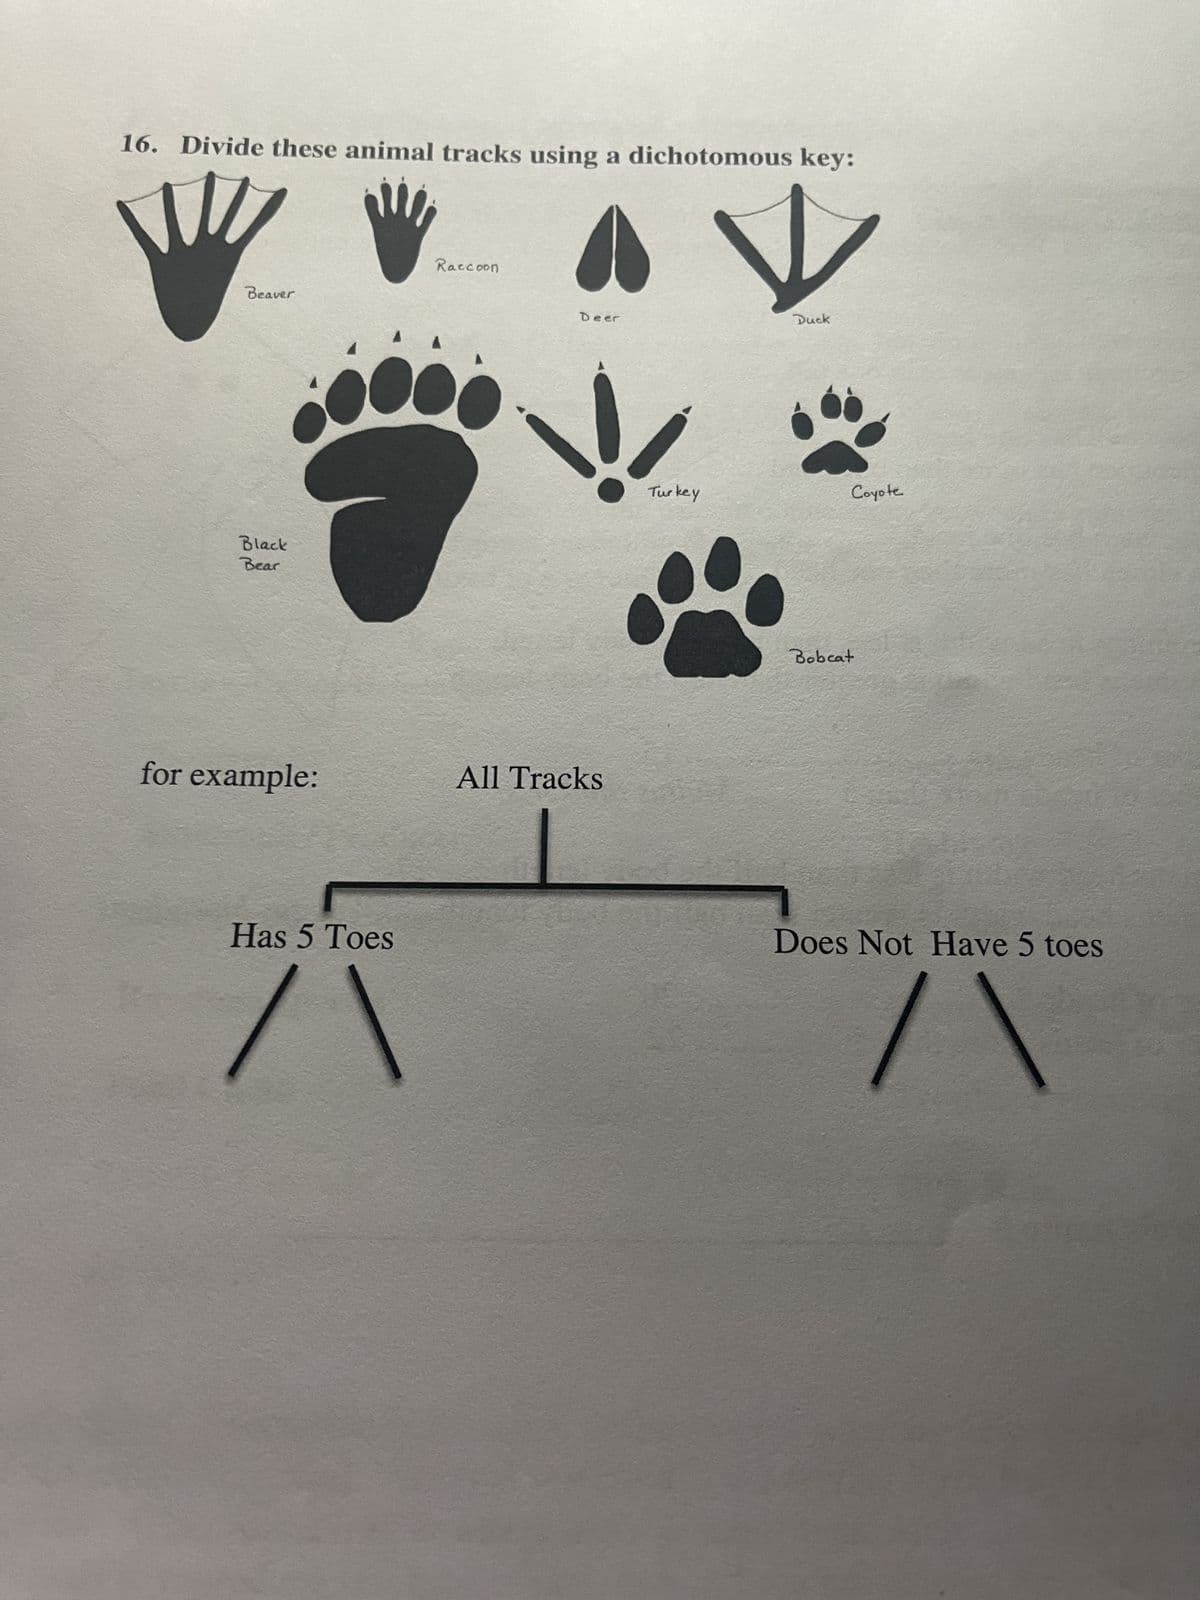 16. Divide these animal tracks using a dichotomous key:
Beaver
Black
Bear
for example:
Has 5 Toes
/1
Raccoon
Deer
All Tracks
Turkey
Duck
Coyote
Bobcat
Does Not Have 5 toes
/\